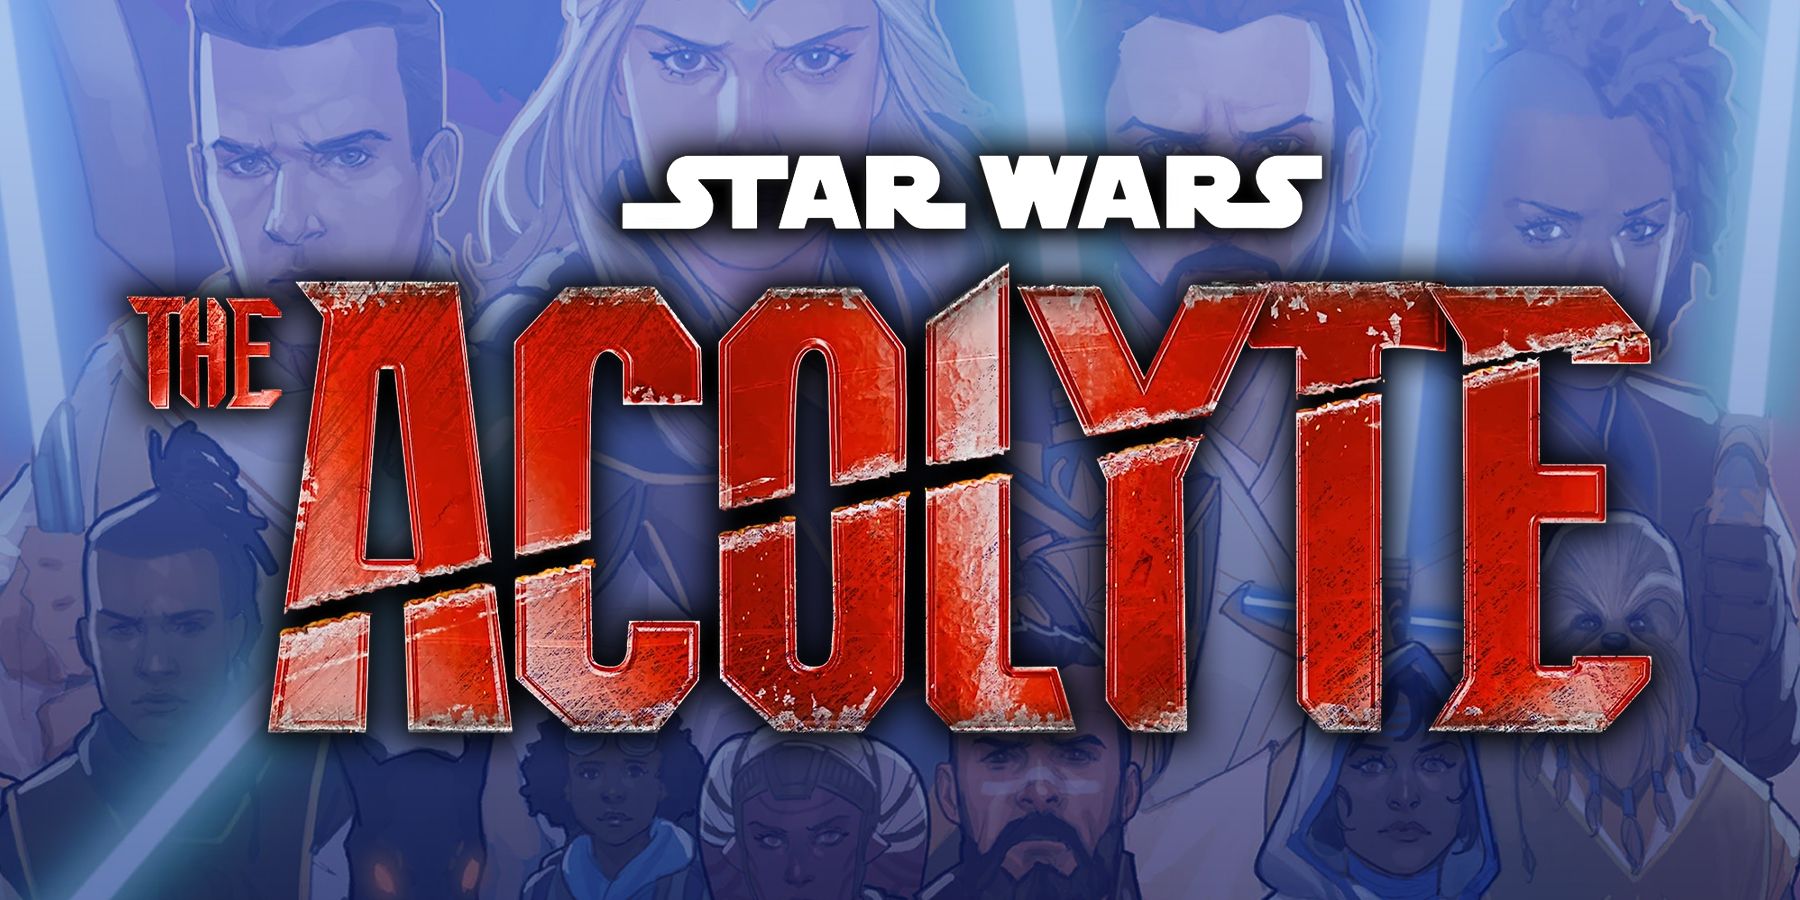 The Star Wars Acolyte logo sits atop an illustration of Jedi from the High Republic era. 